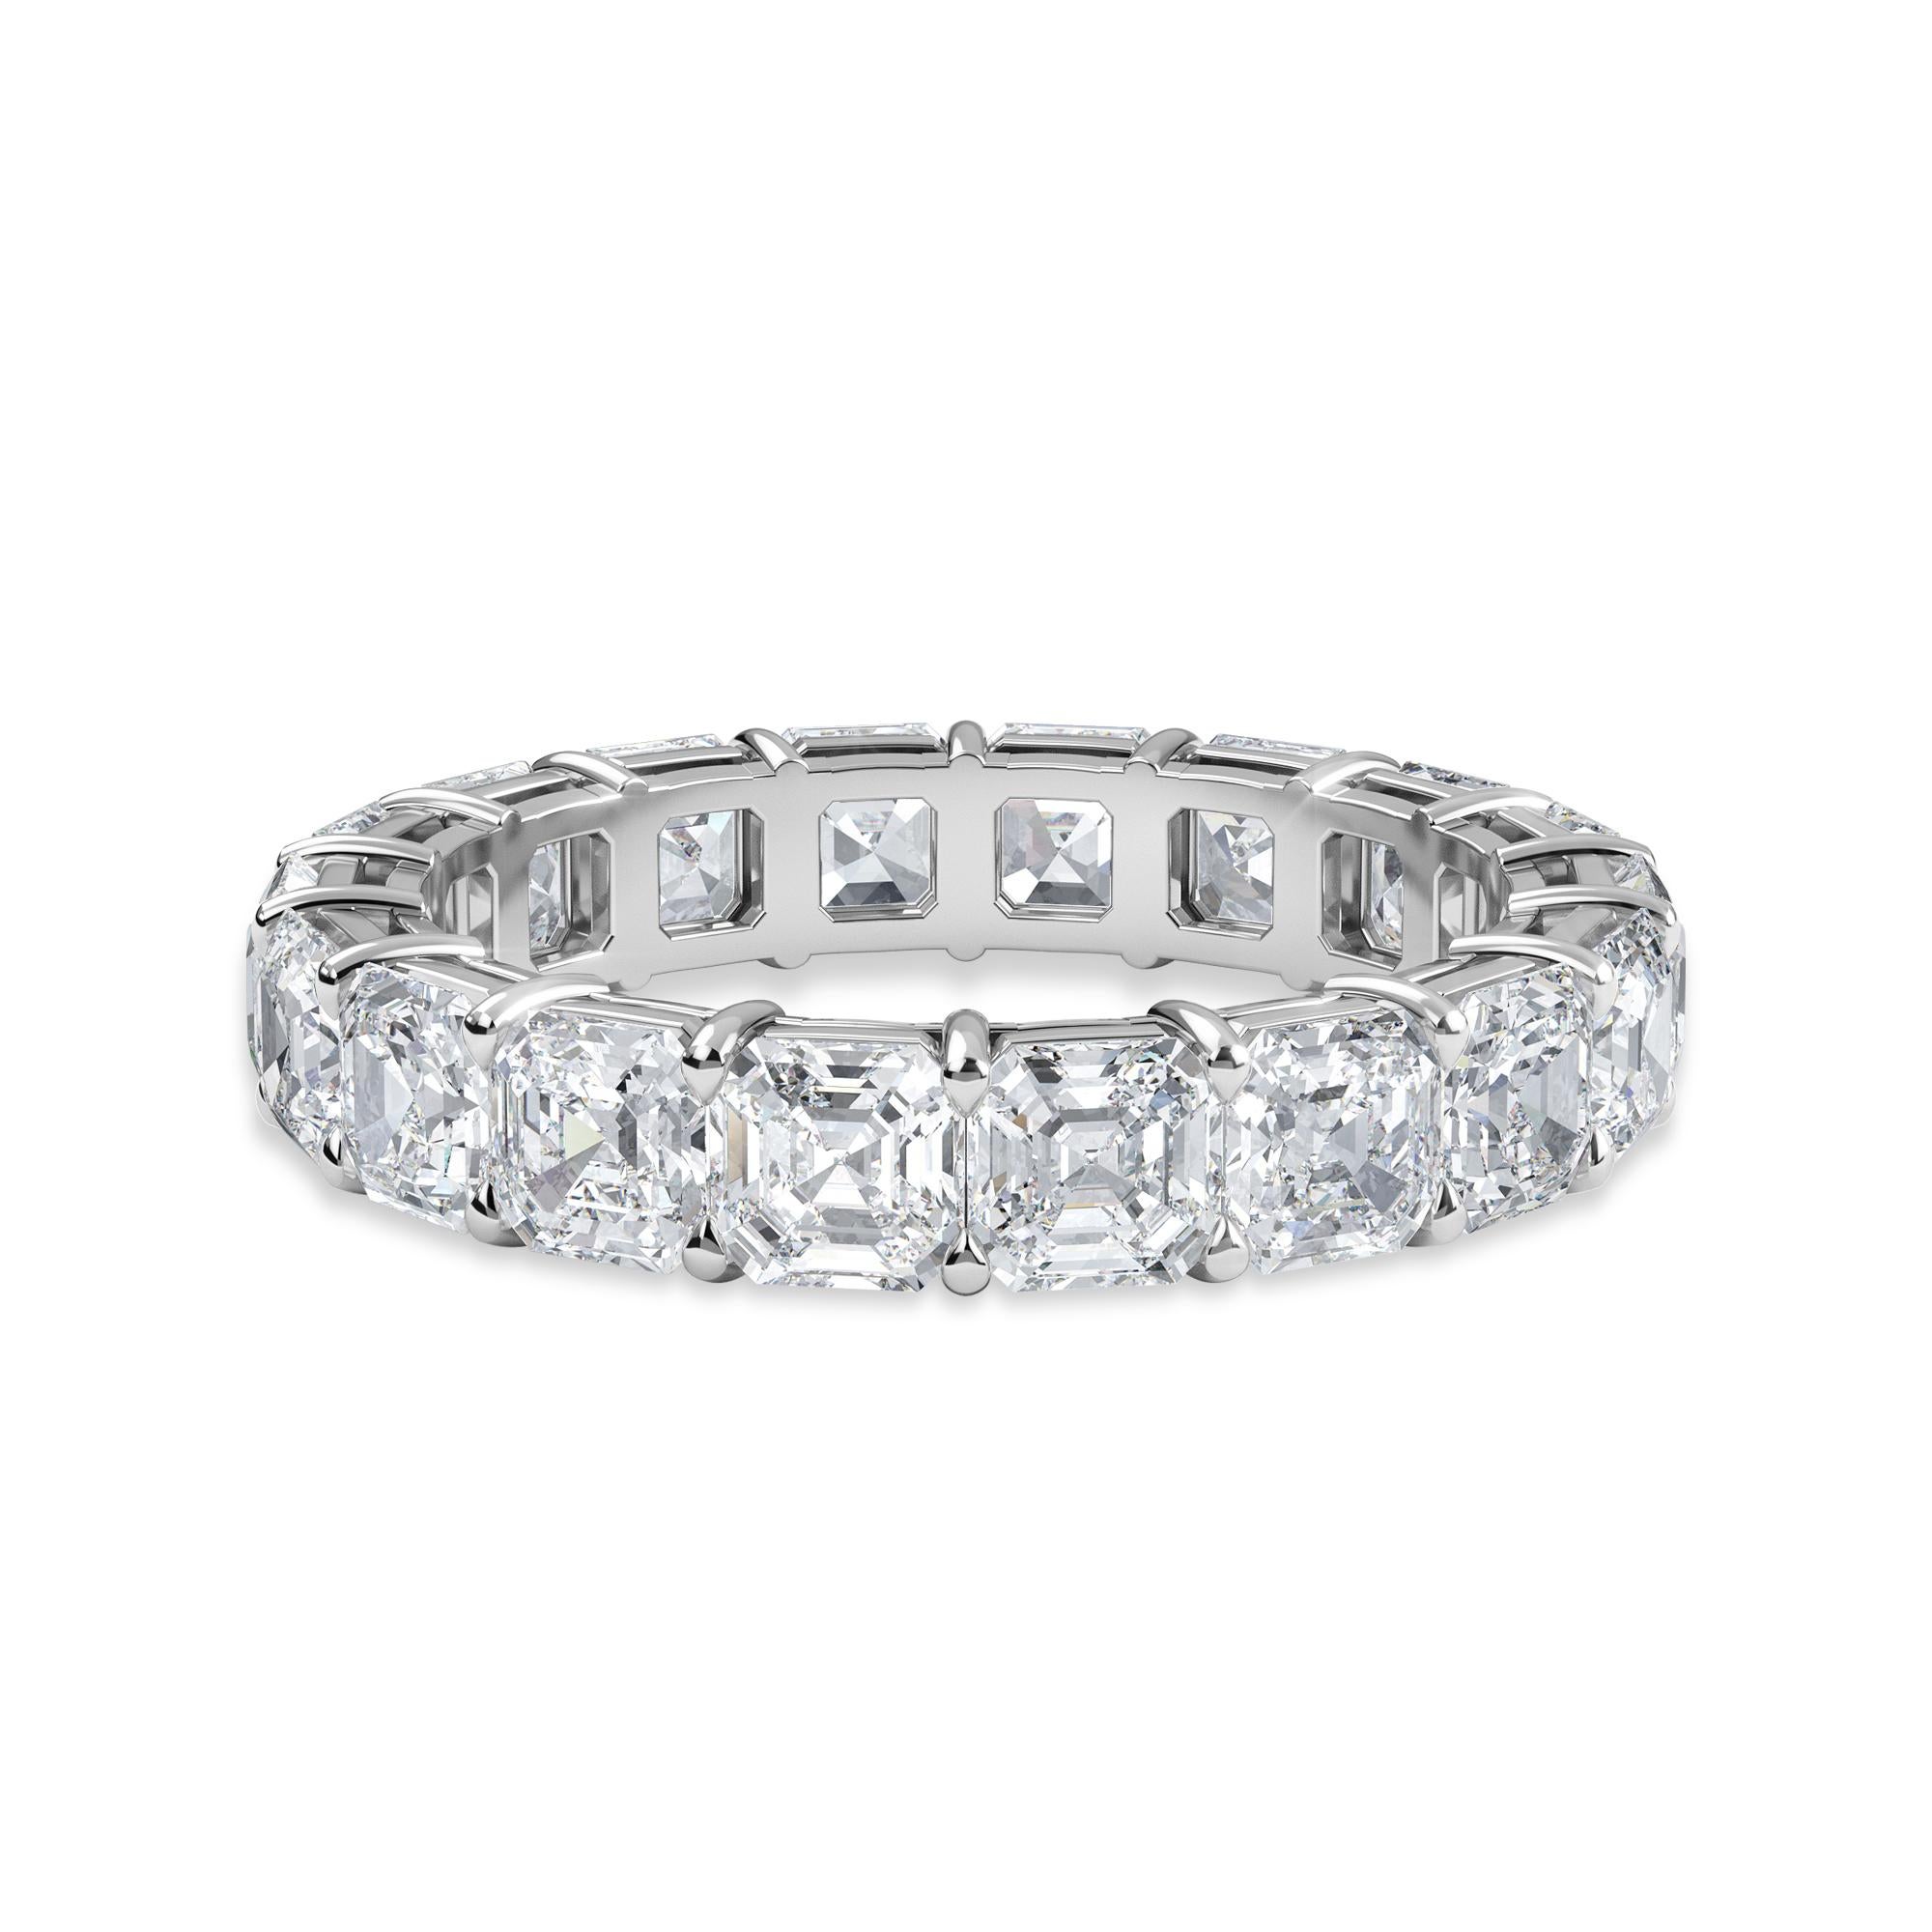 This Asscher diamond eternity band has 18 Asscher diamonds with a total carat weight of 5.50.
The diamonds are F color VS clarity. The ring is a finger size 6.25 and is set in platinum.